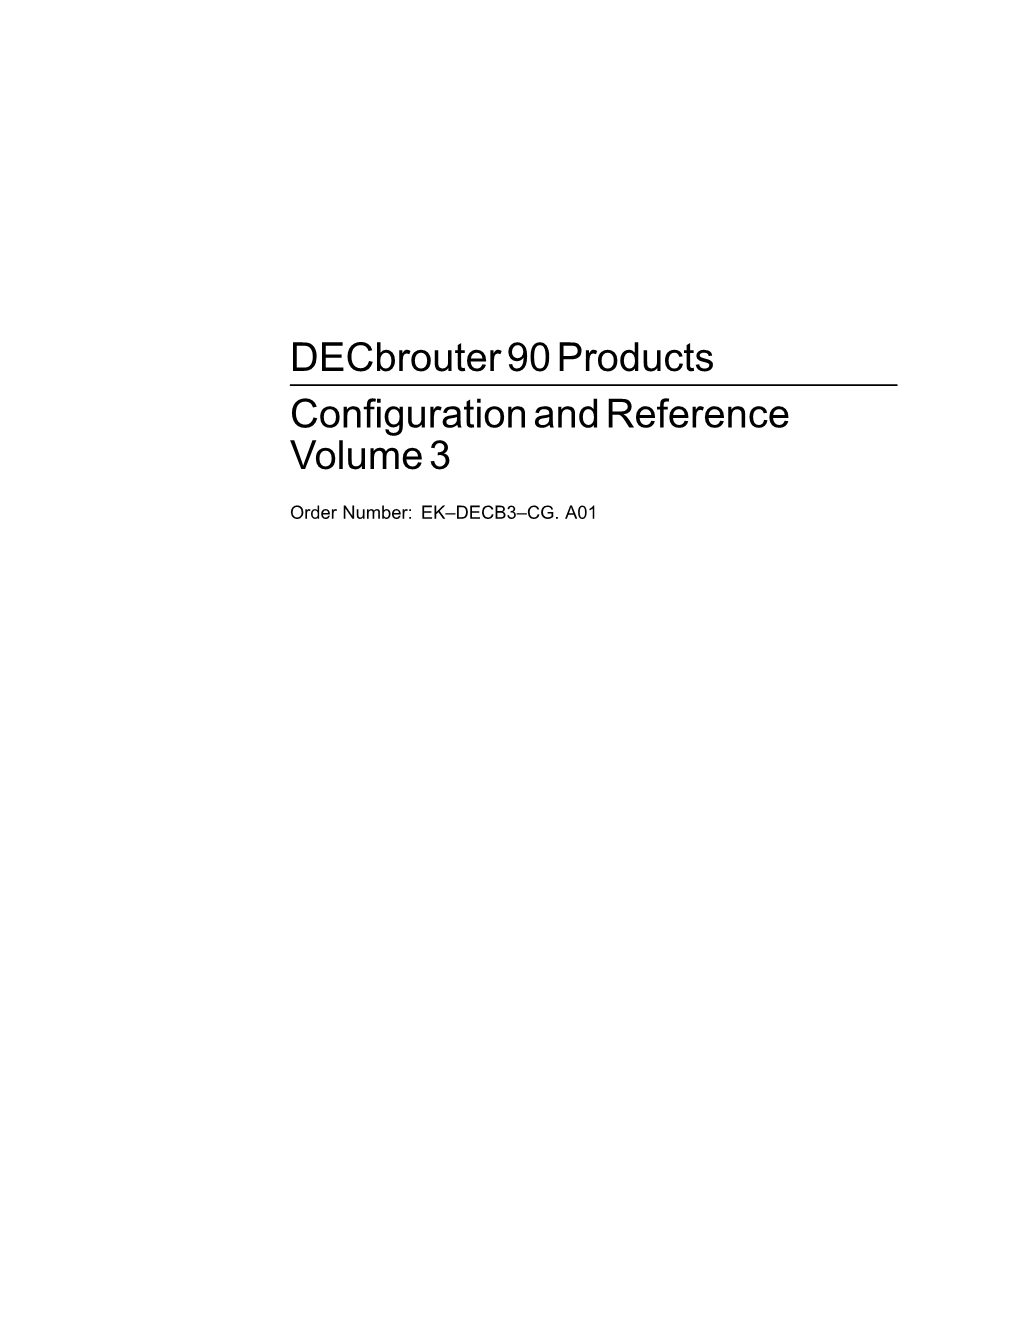 Decbrouter 90 Products Configuration and Reference